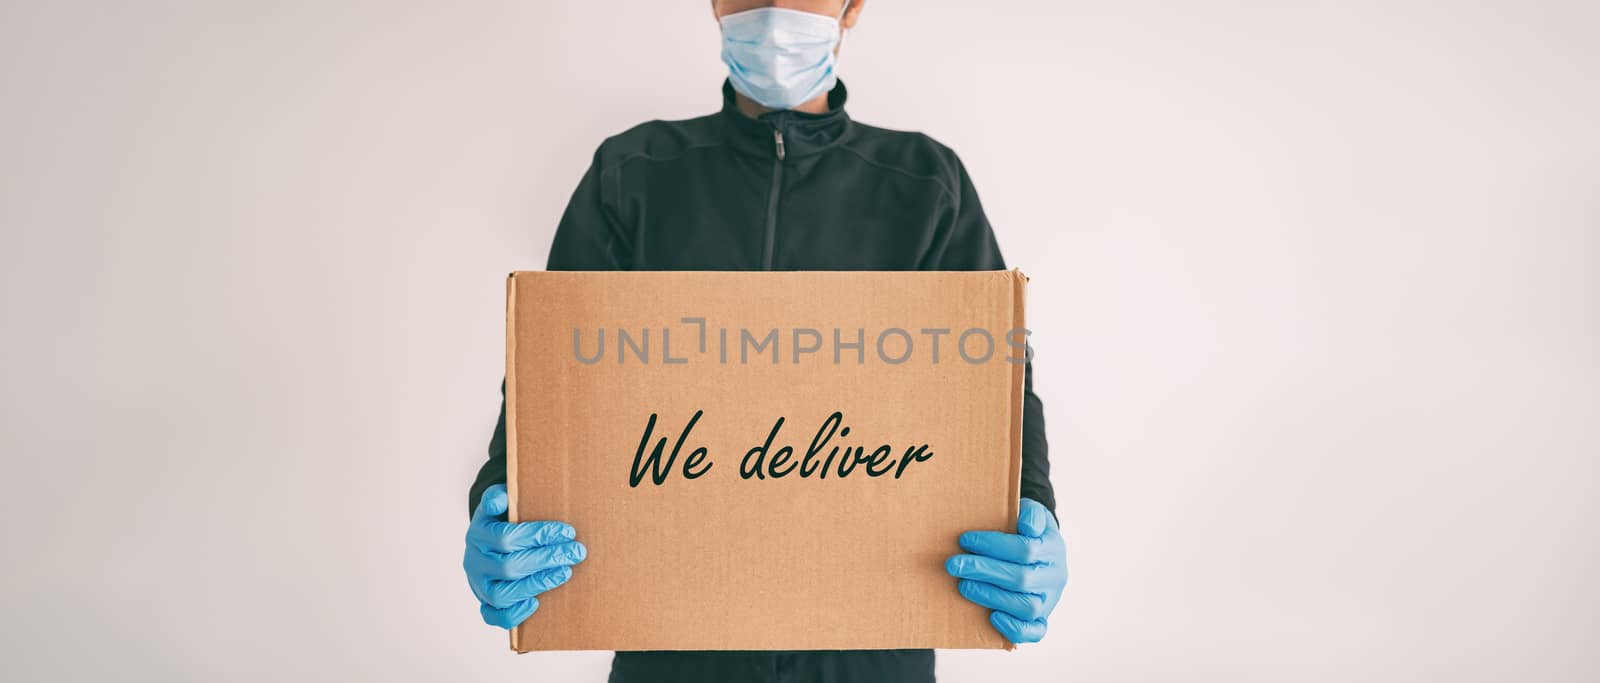 Home delivery WE DELIVER sign on cardboard box banner. Food grocery package online shopping man delivering with gloves and mask for COVID-19 coronavirus social distancing carrying at door by Maridav